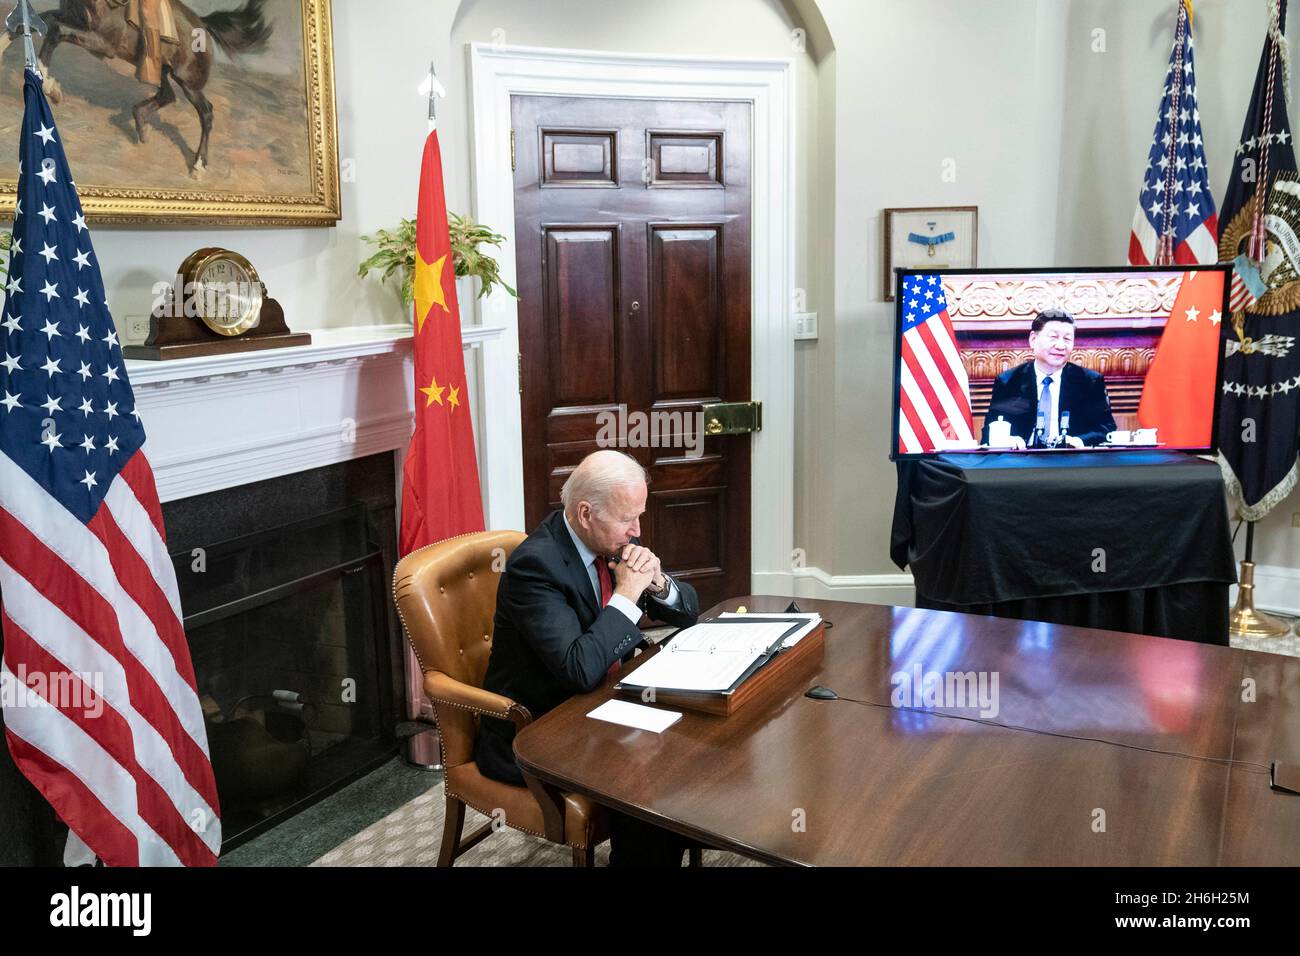 President Joe Biden listens during a virtual summit with Chinese President Xi Jinping in the Roosevelt Room of the White House in Washington DC on Monday, November 15, 2021. Photo by Sarah Silbiger/Pool/ABACAPRESS.COM Stock Photo